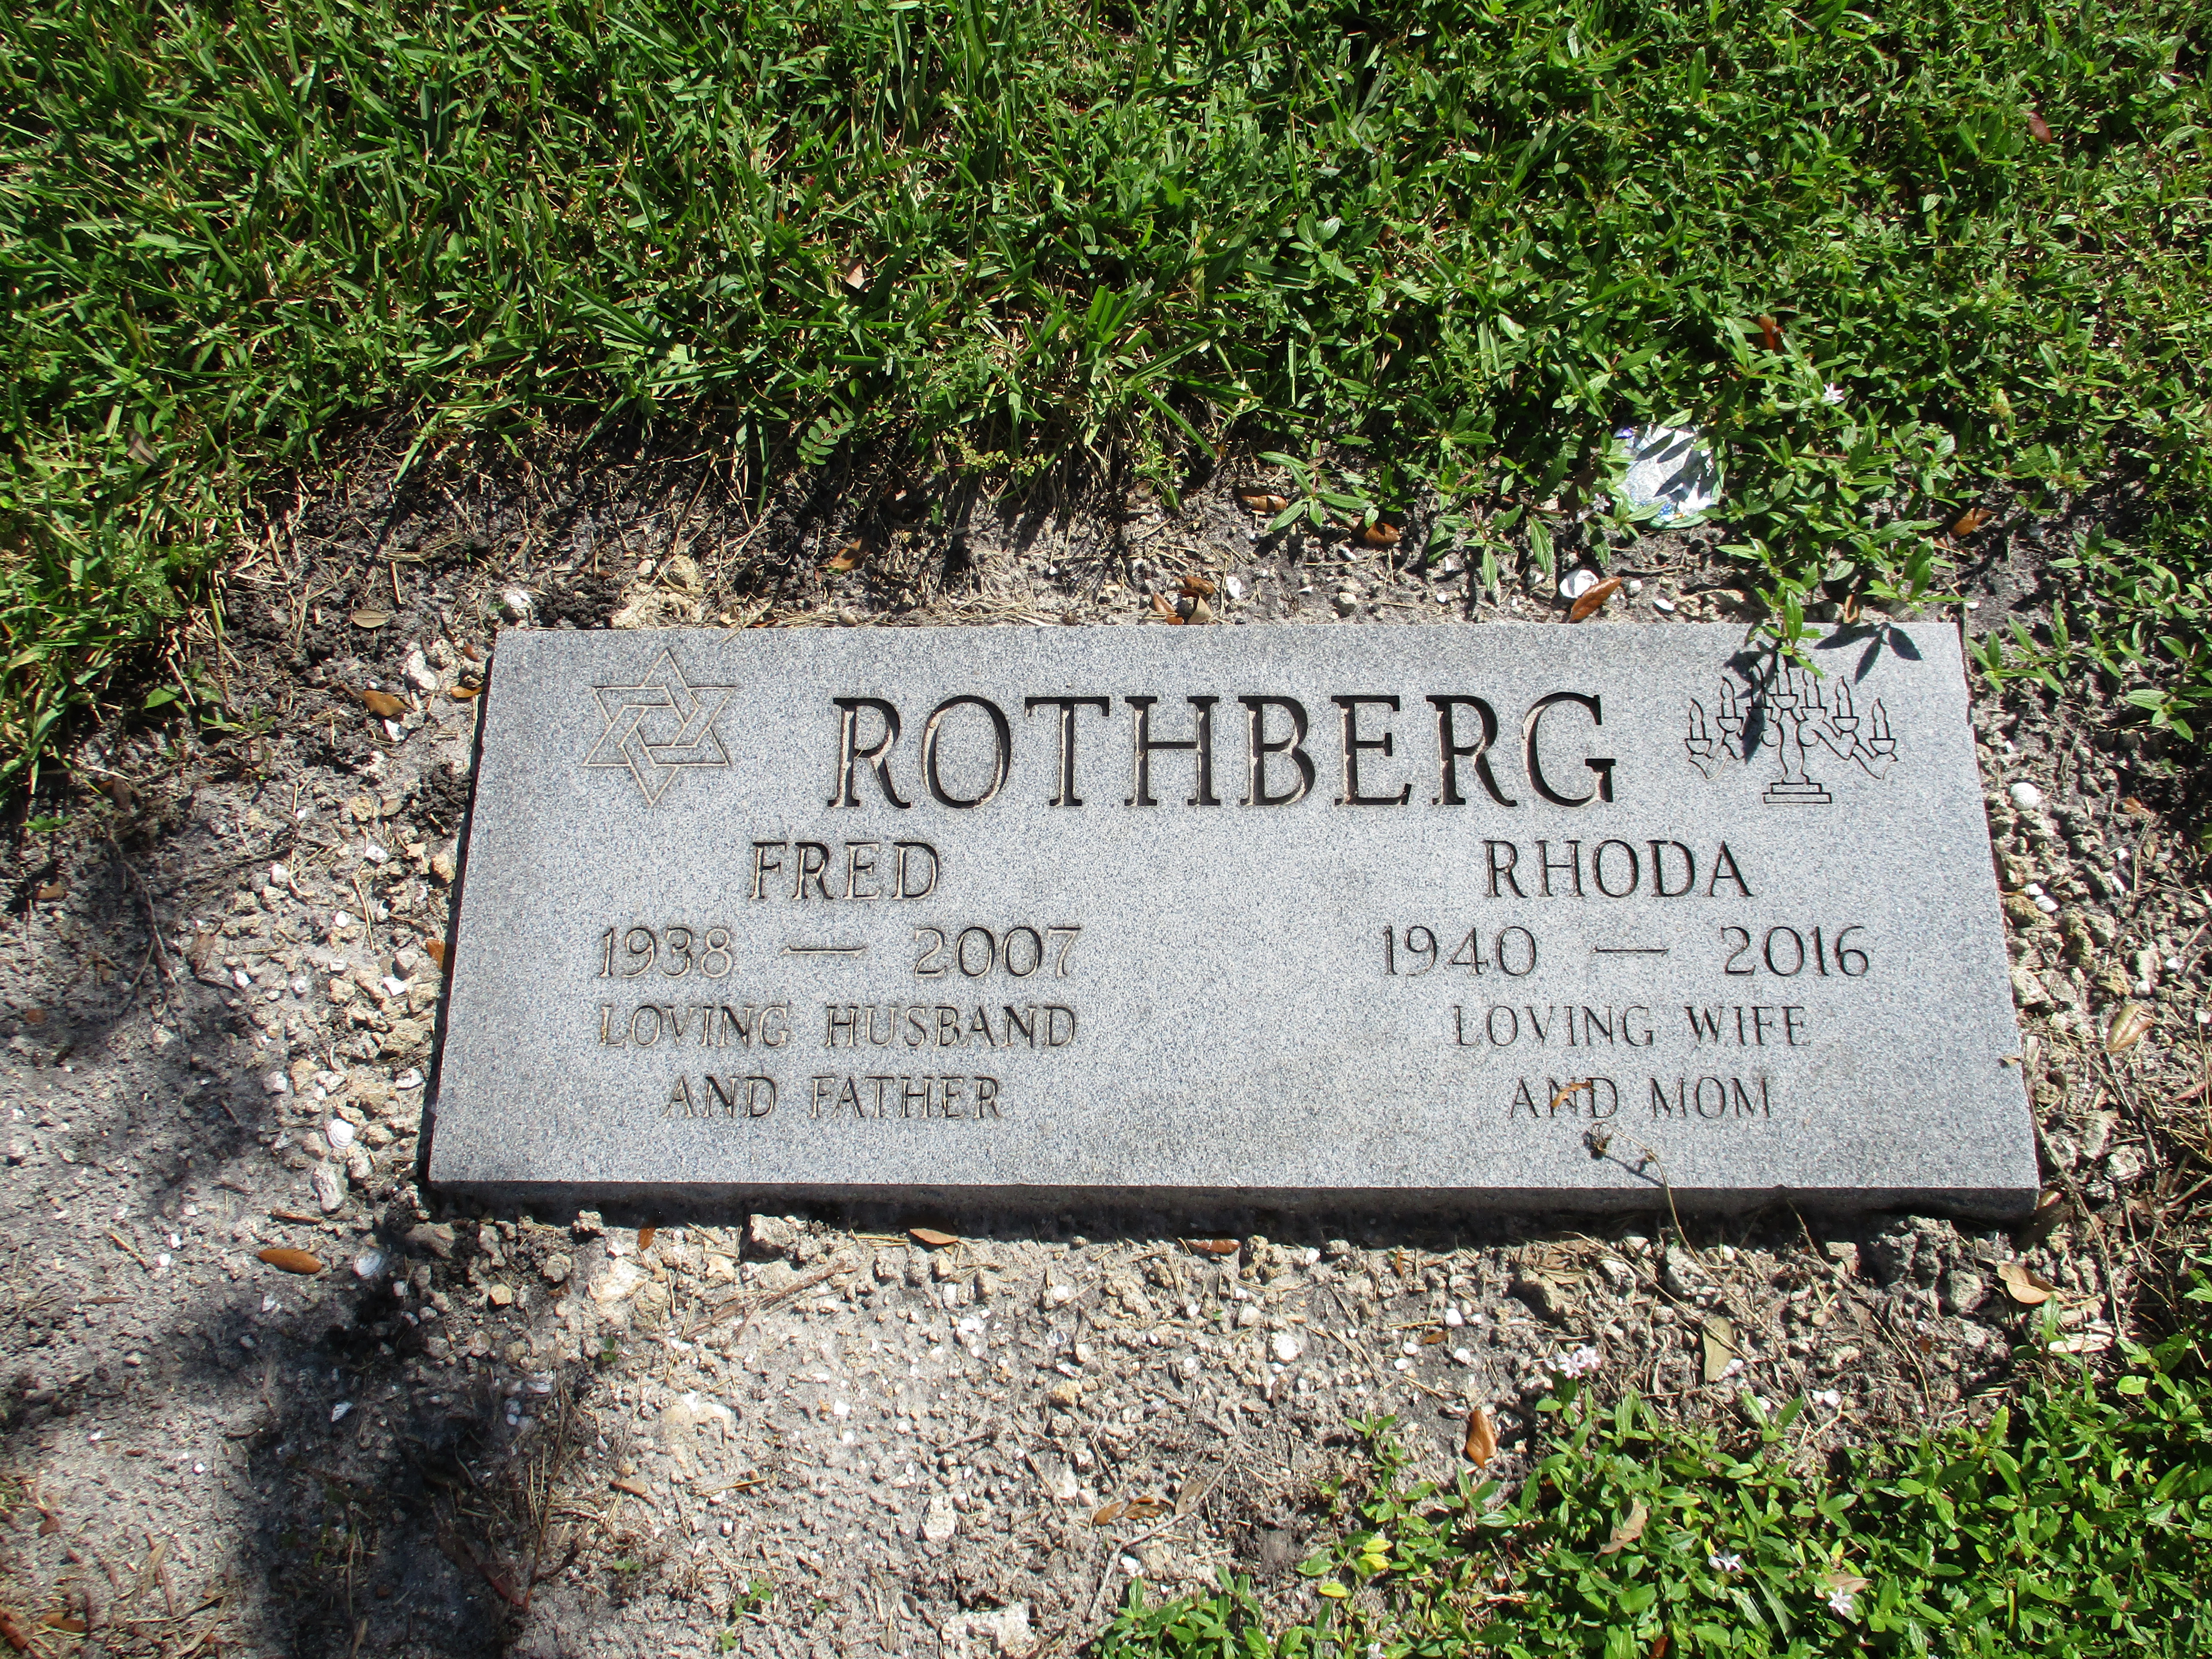 Fred Rothberg